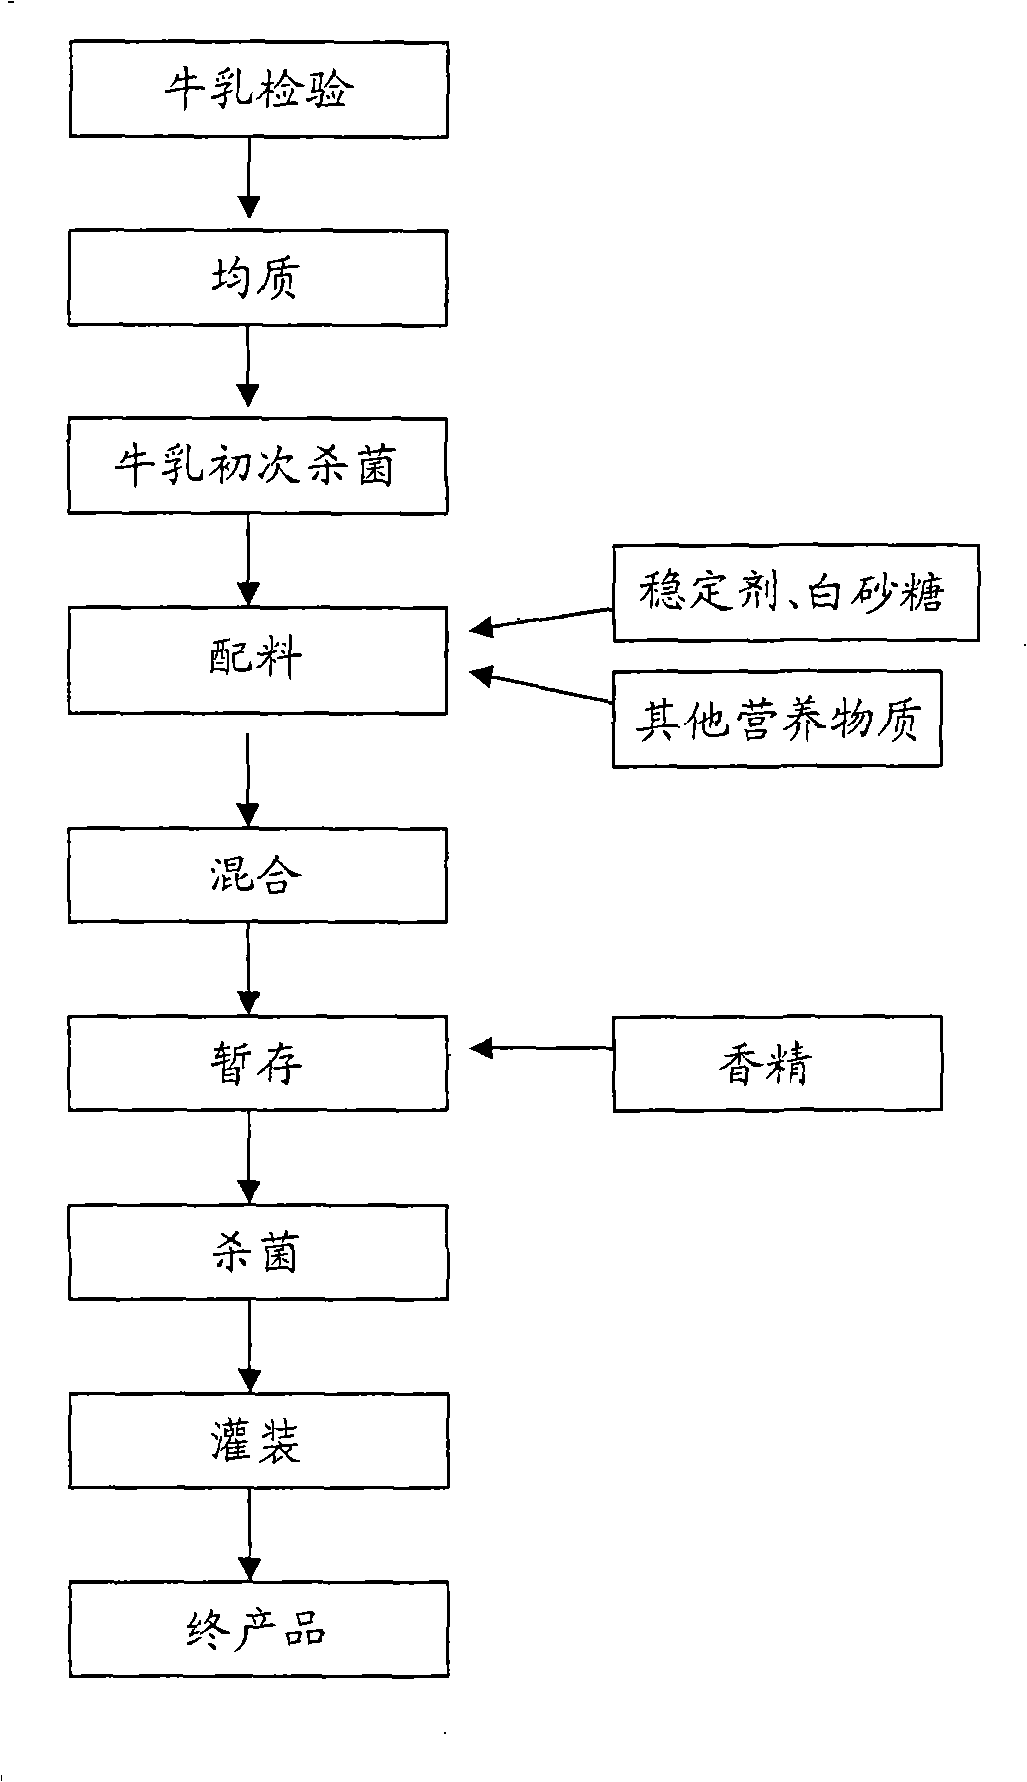 Method for producing milk product